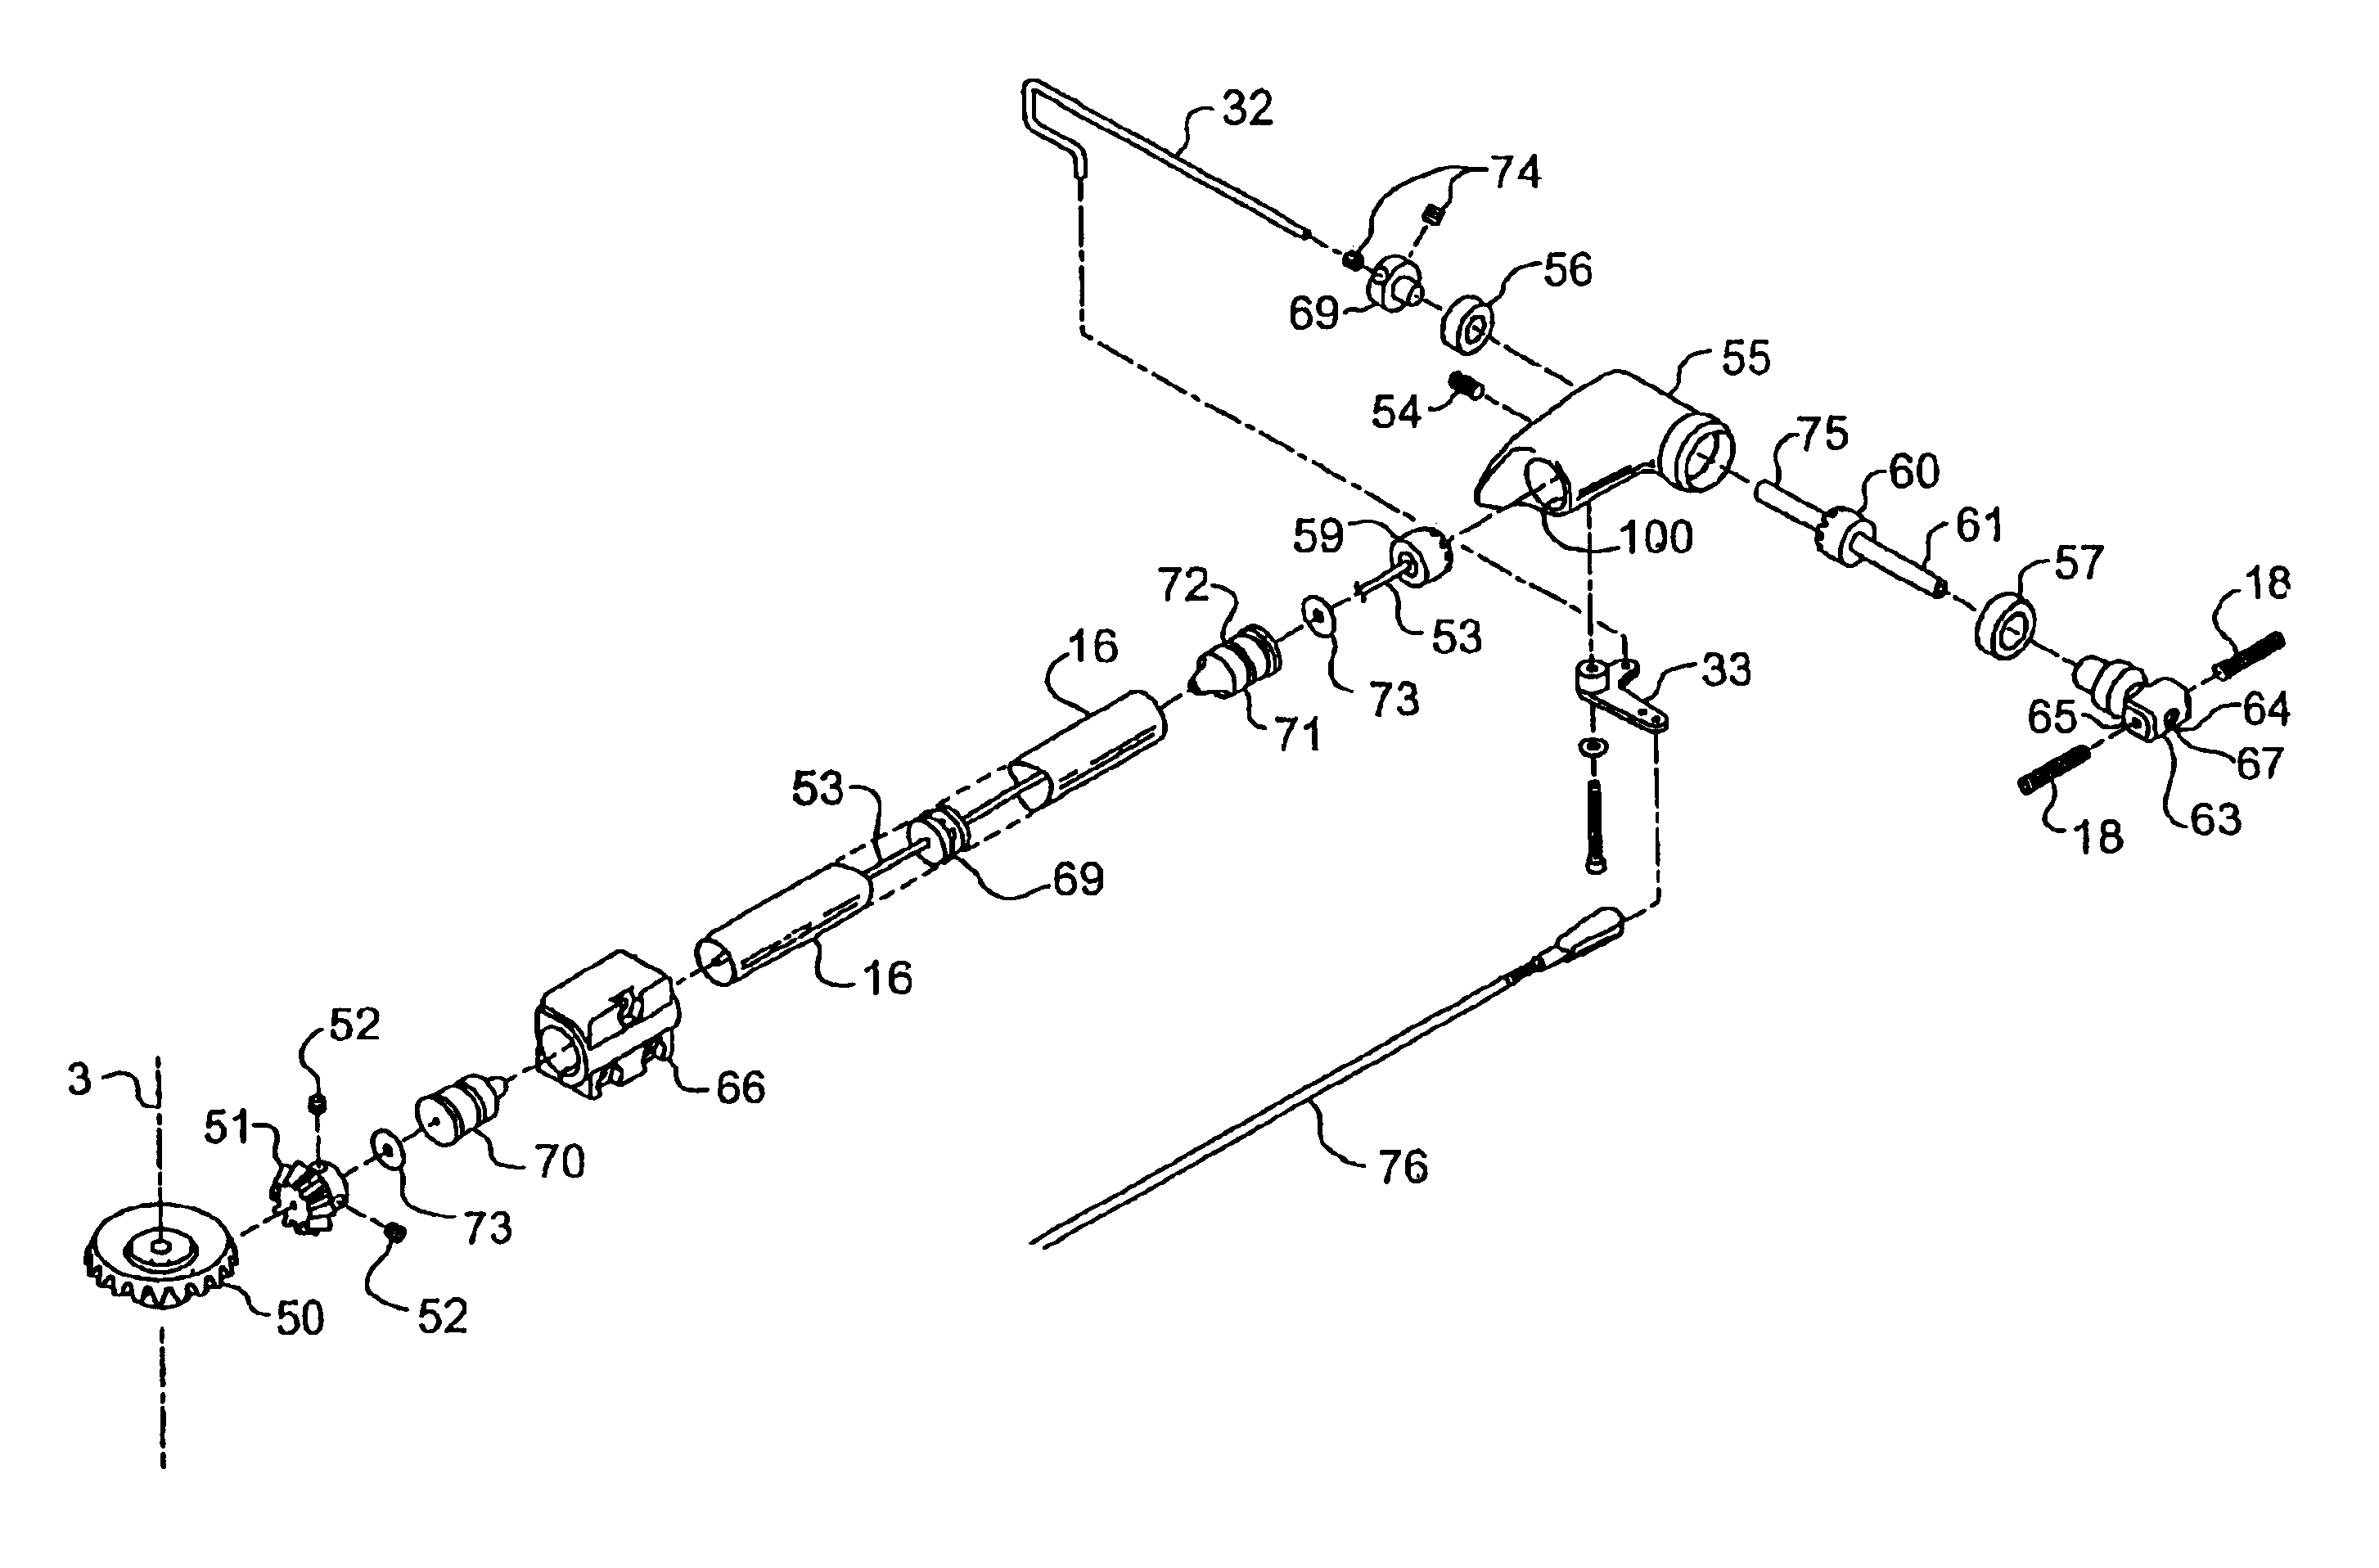 Rotor system for helicopters